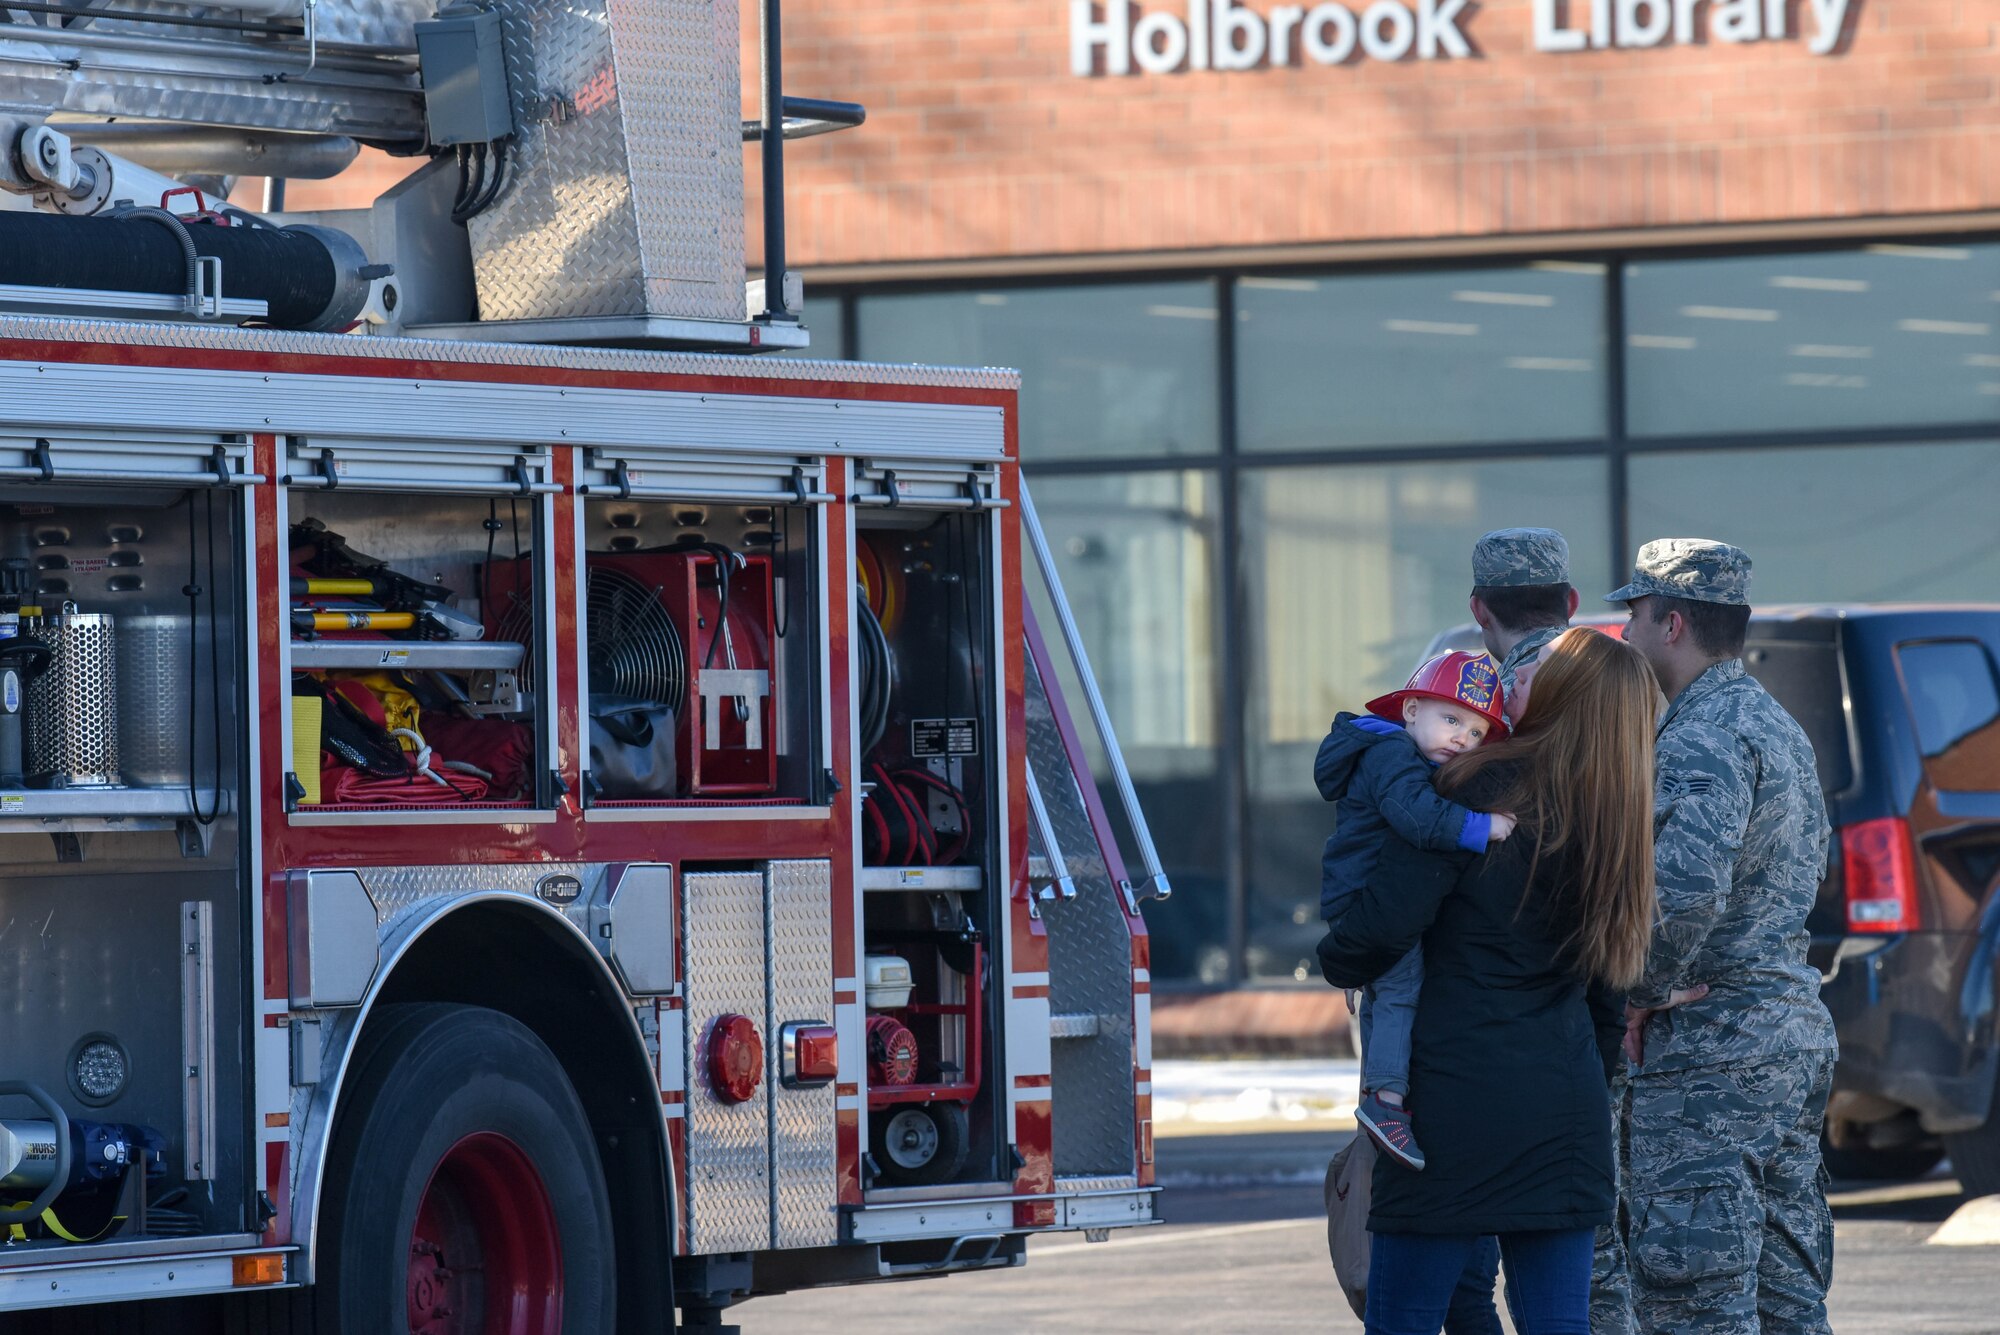 Airmen and their families are shown the different components of a fire truck following the “Santa and Me Story Time” event at the Holbrook Library on Ellsworth Air Force Base, S.D., Dec. 13, 2018. The 28th Civil Engineer Squadron Fire Department escorted Santa Claus to the library, where he visited with the base’s children and read a holiday story. (U.S. Air Force photo by Tech. Sgt. Jette Carr)